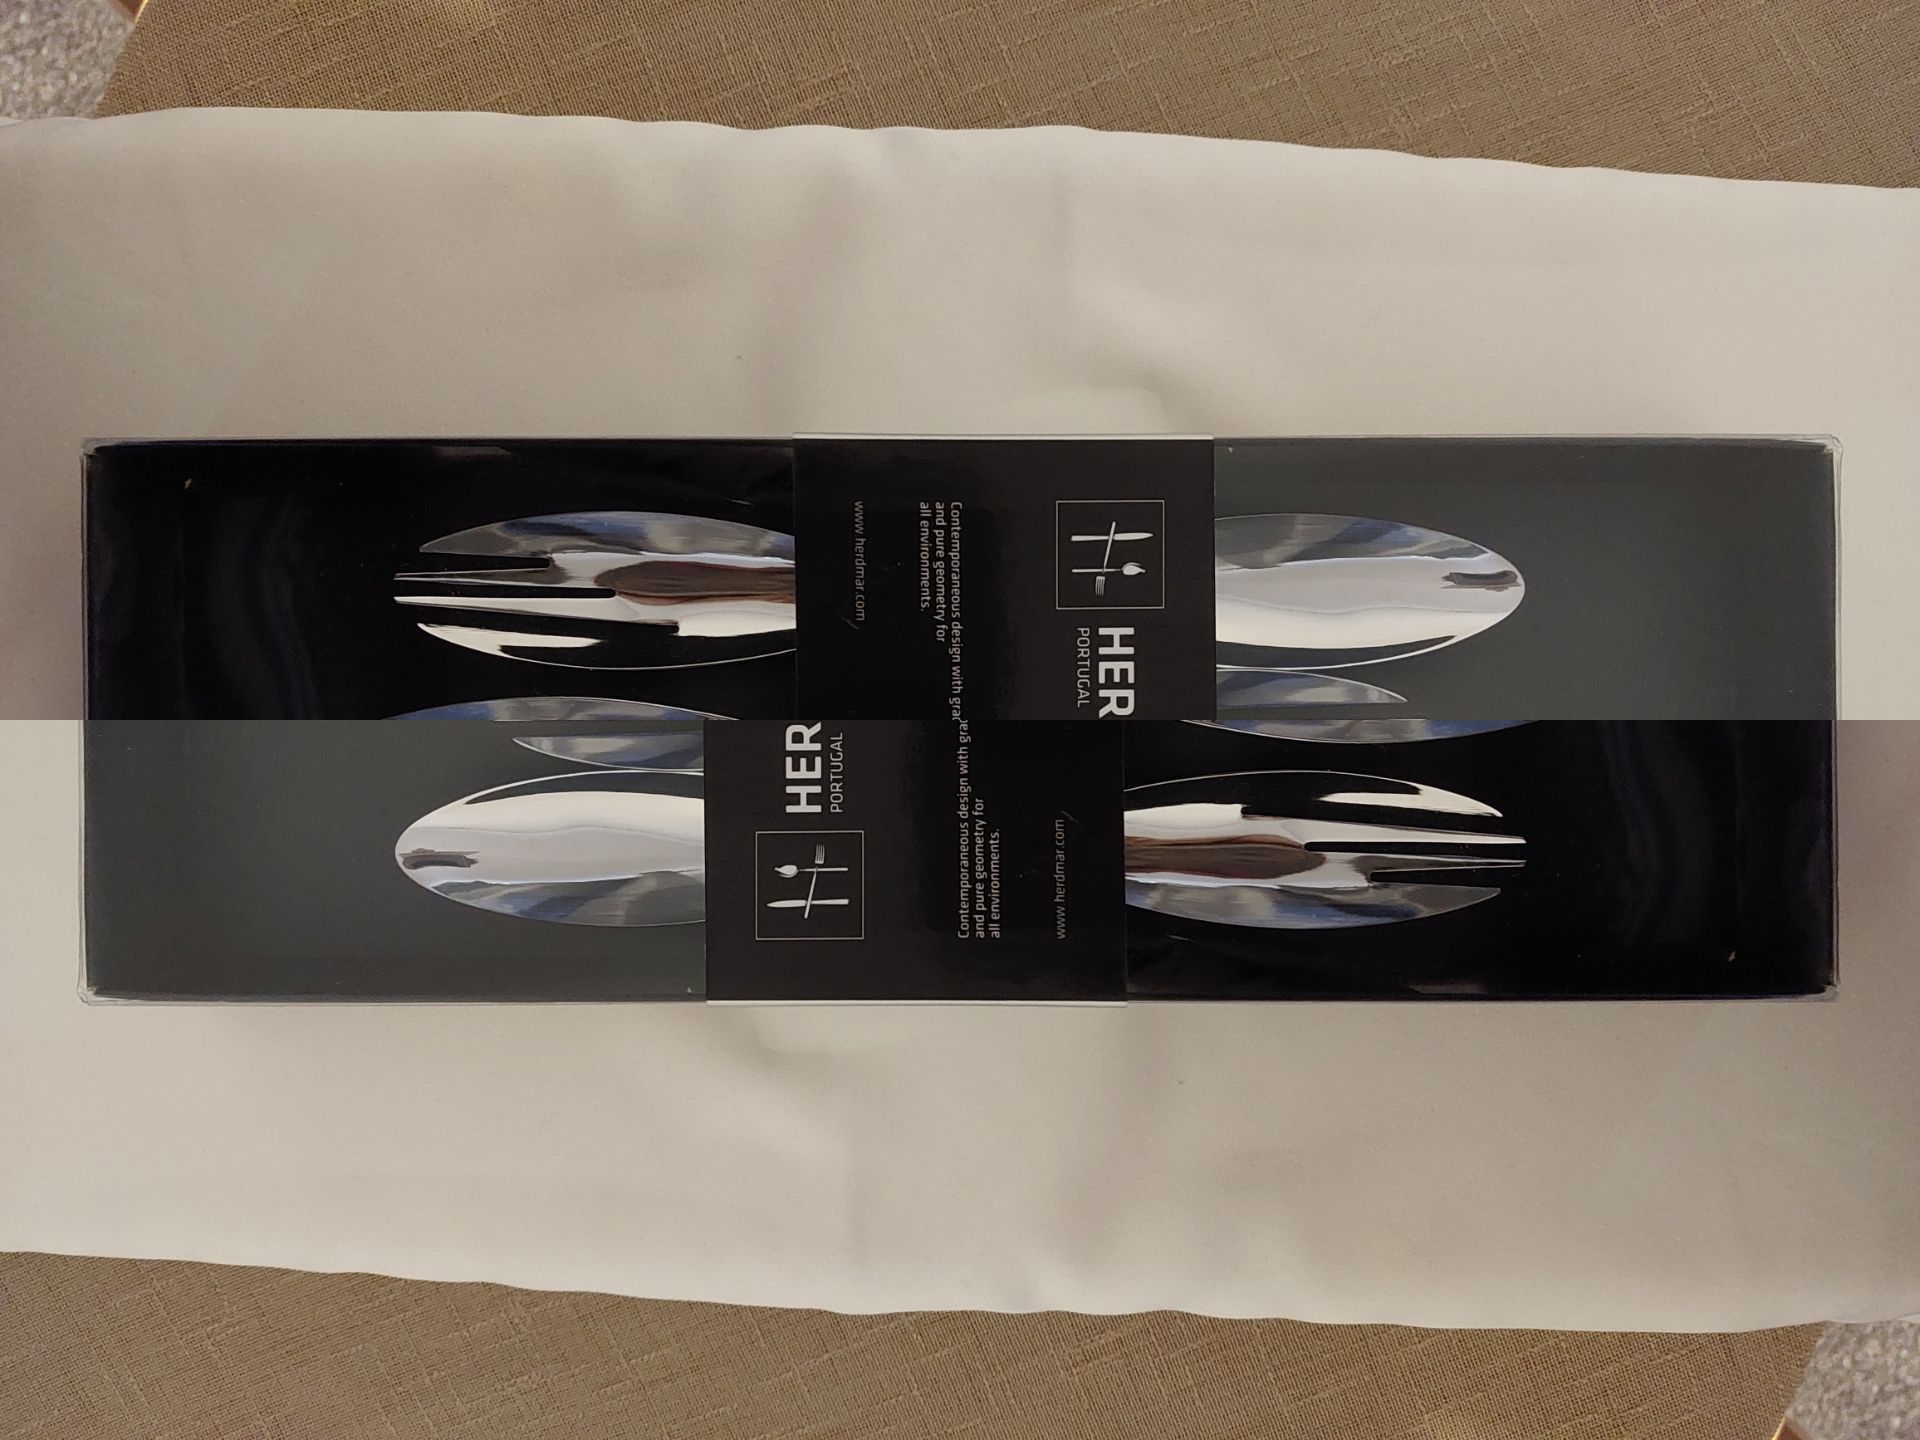 Spoon Fork Sets x 10 Boxes of 2